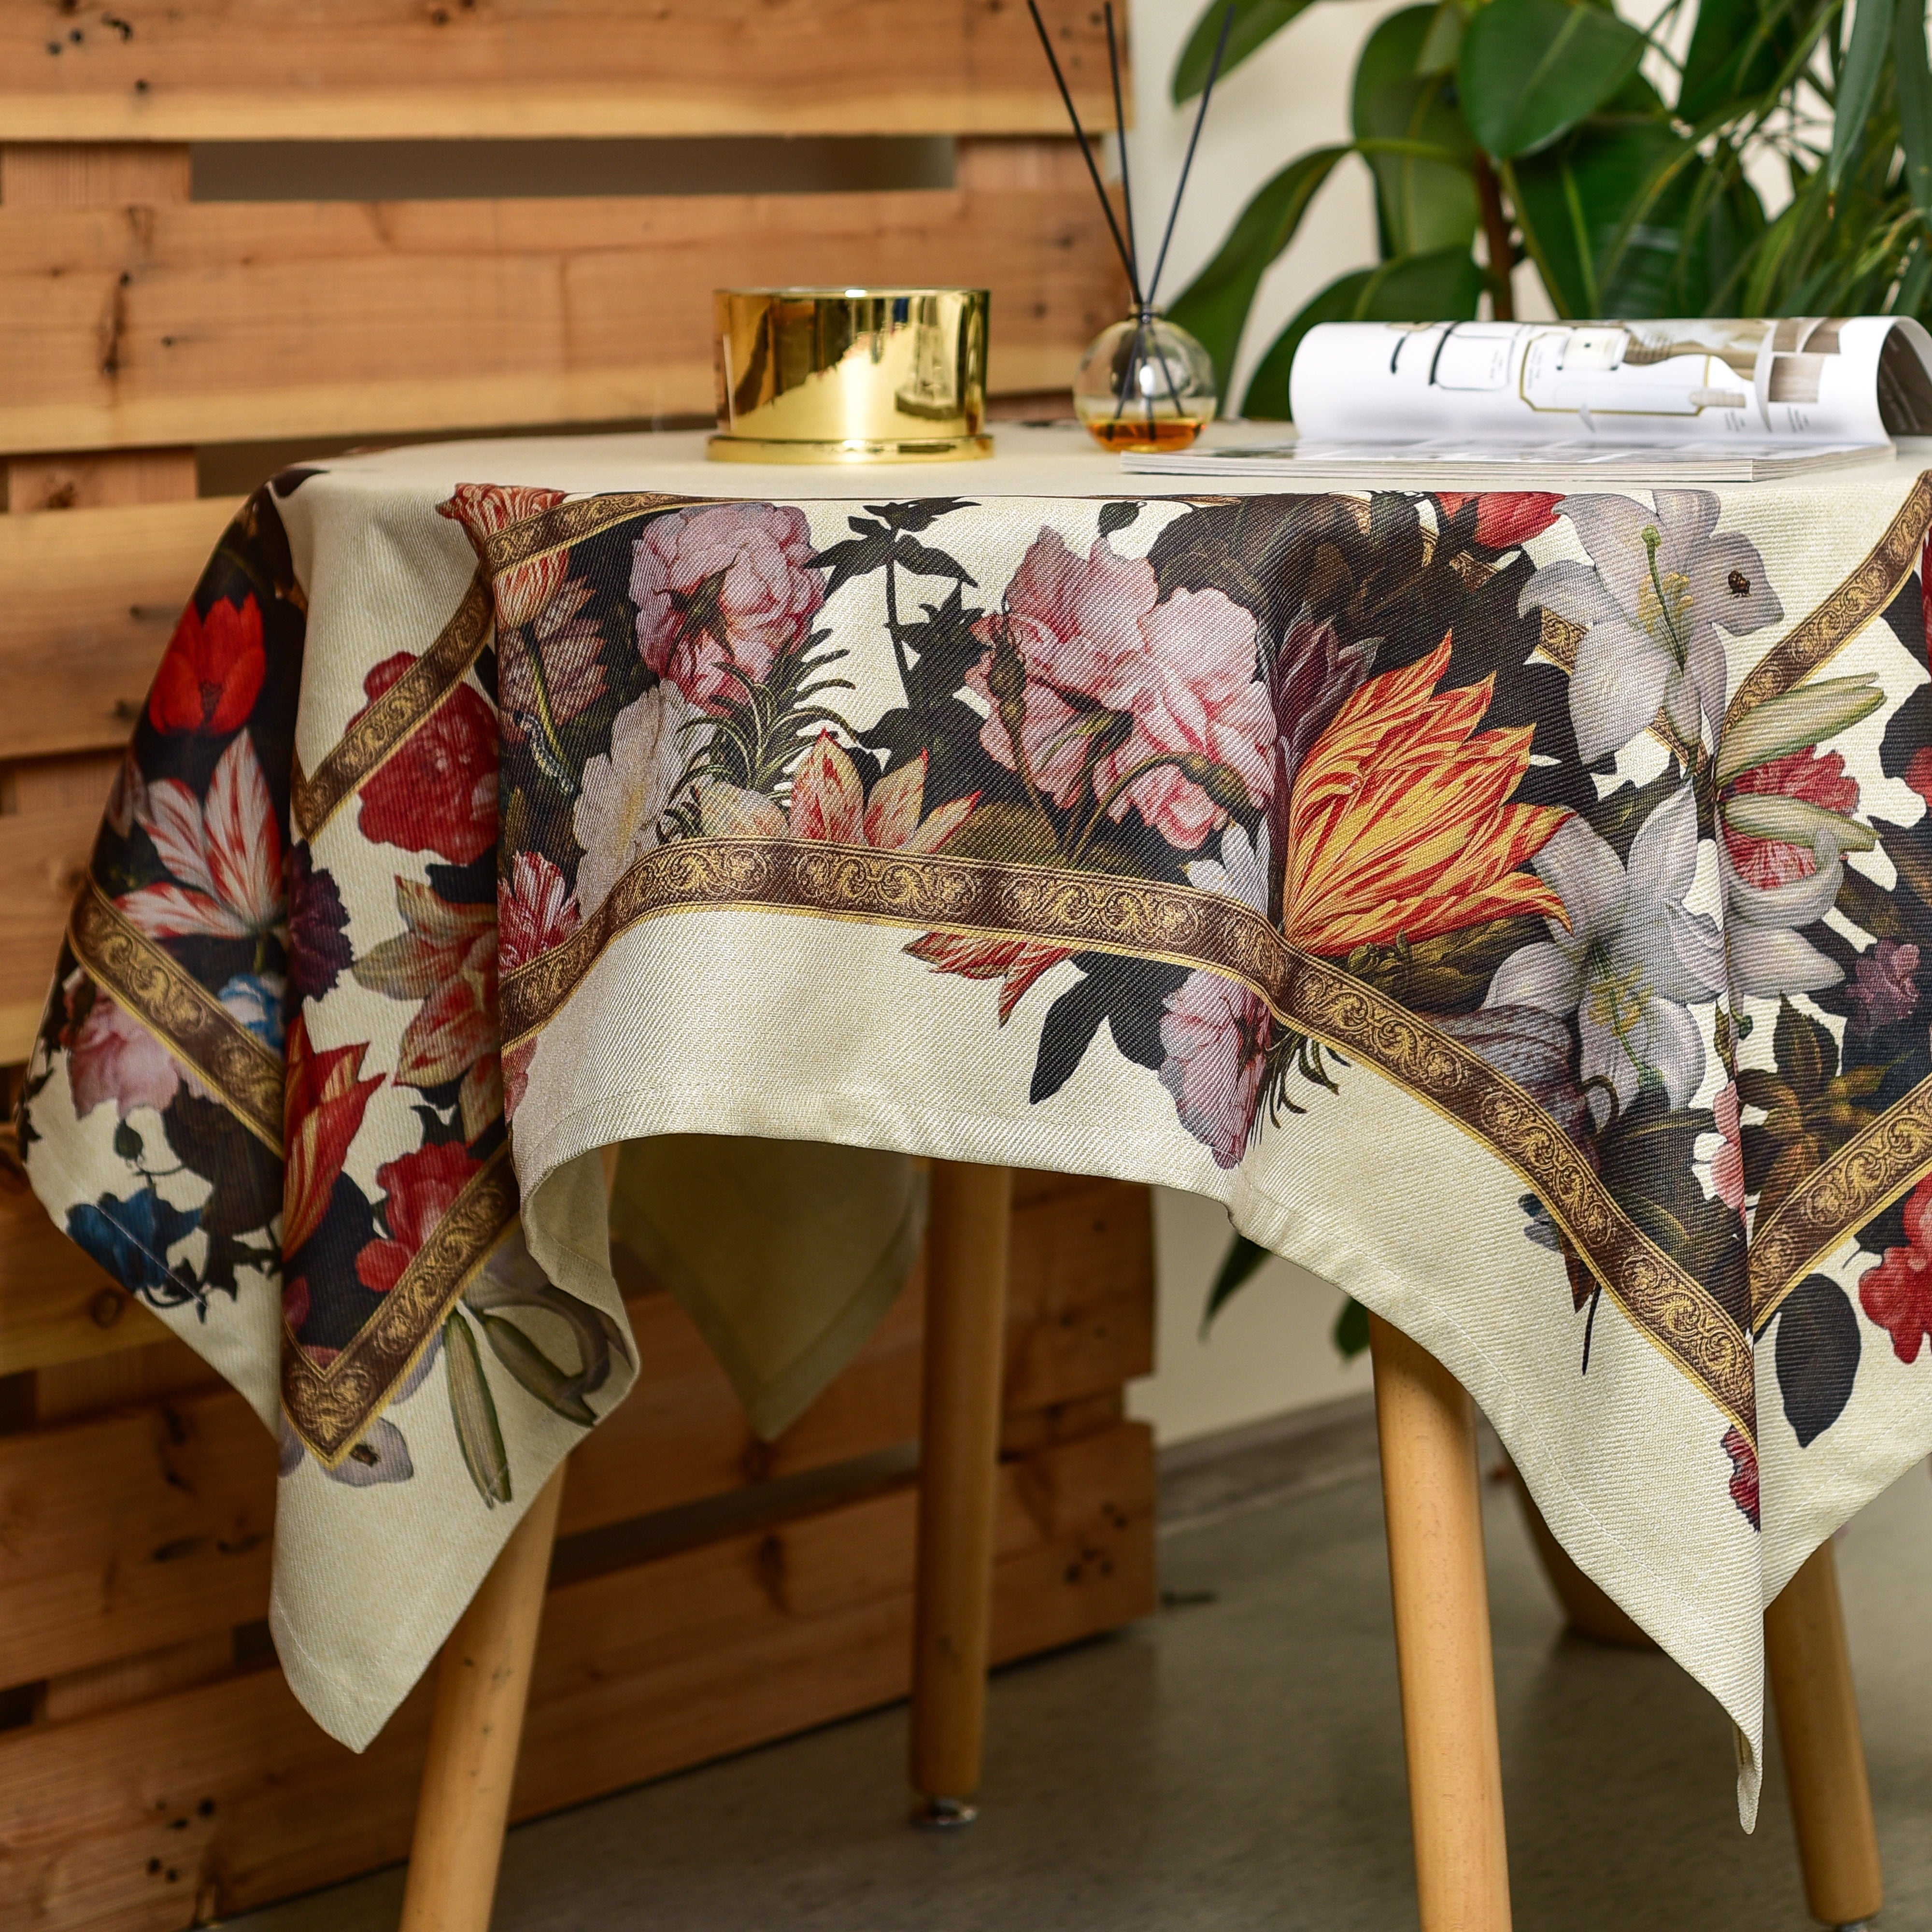 Recycled fabric tablecloth Ambrosius Bosschaert "Still-Life of Flowers"